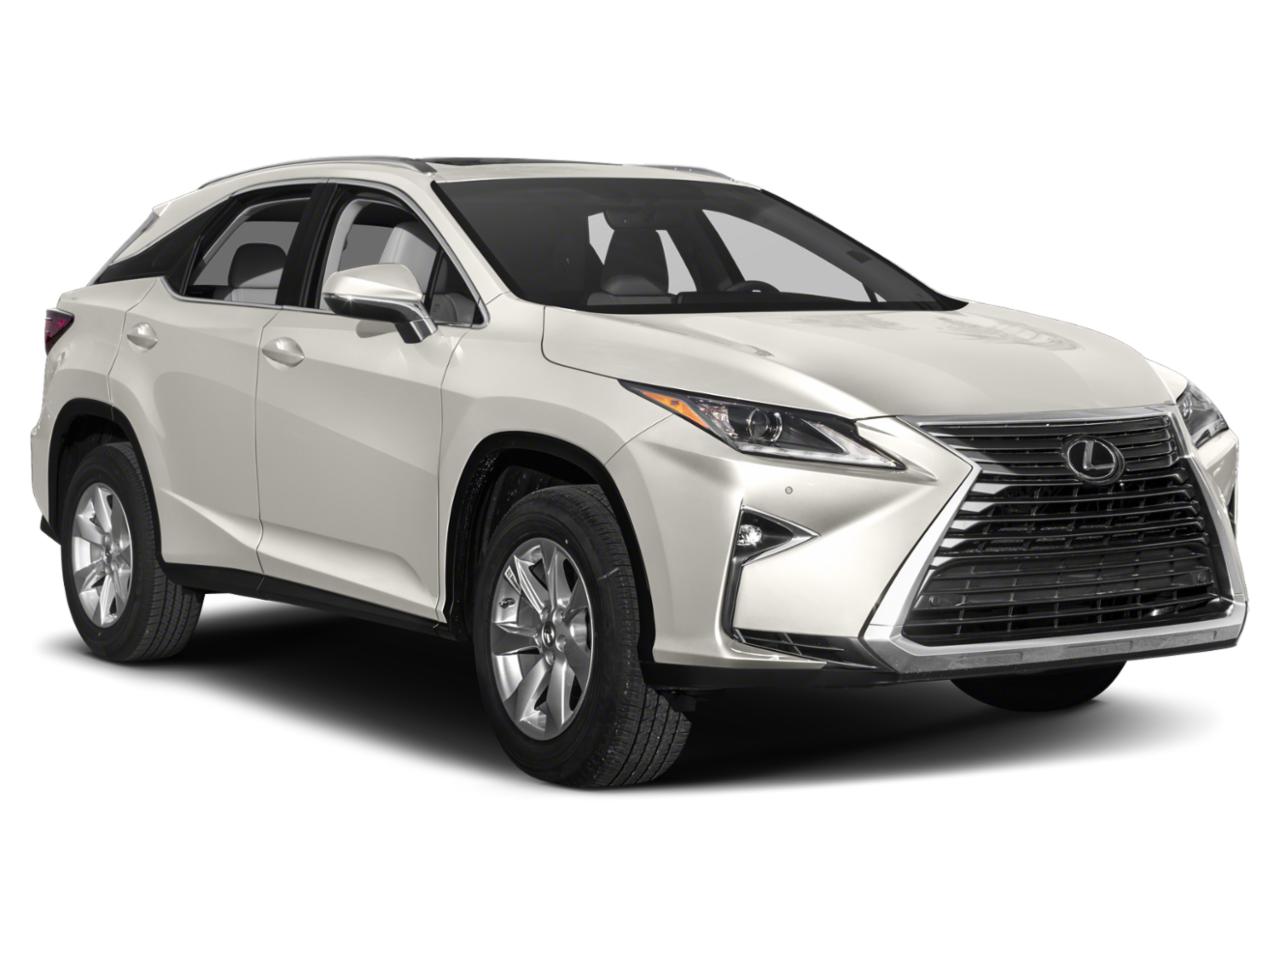 Used 2018 Lexus RX 350 in Obsidian for Sale in Baltimore | J2037323 ...